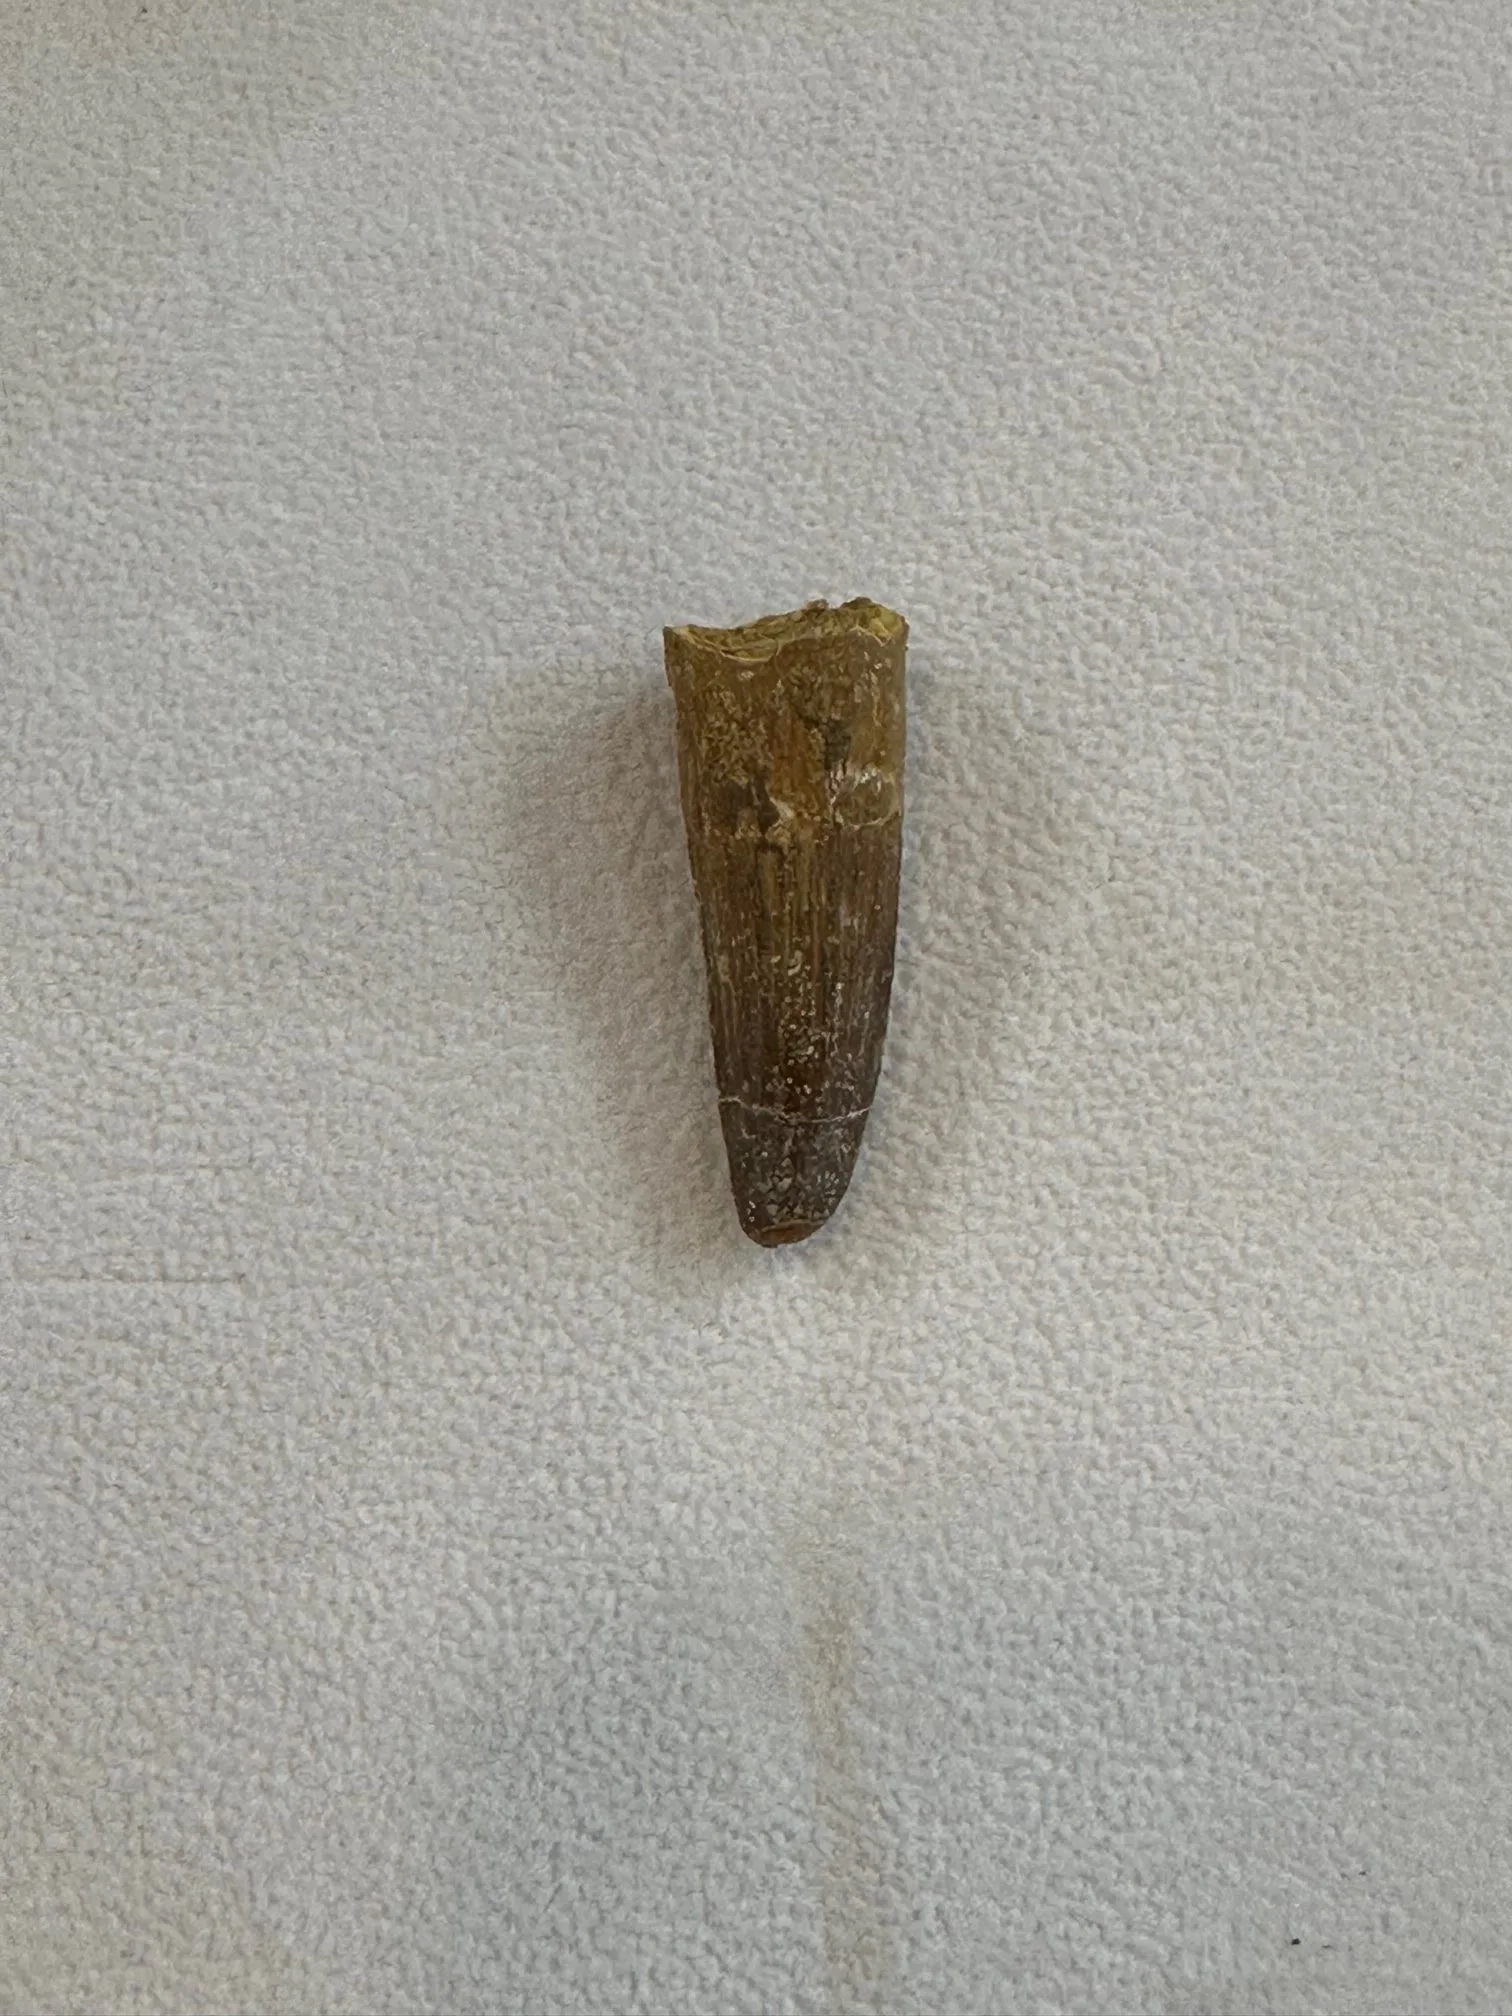 Fossil Spinosaurus Tooth, Morocco, 1 1/2 inch Prehistoric Online